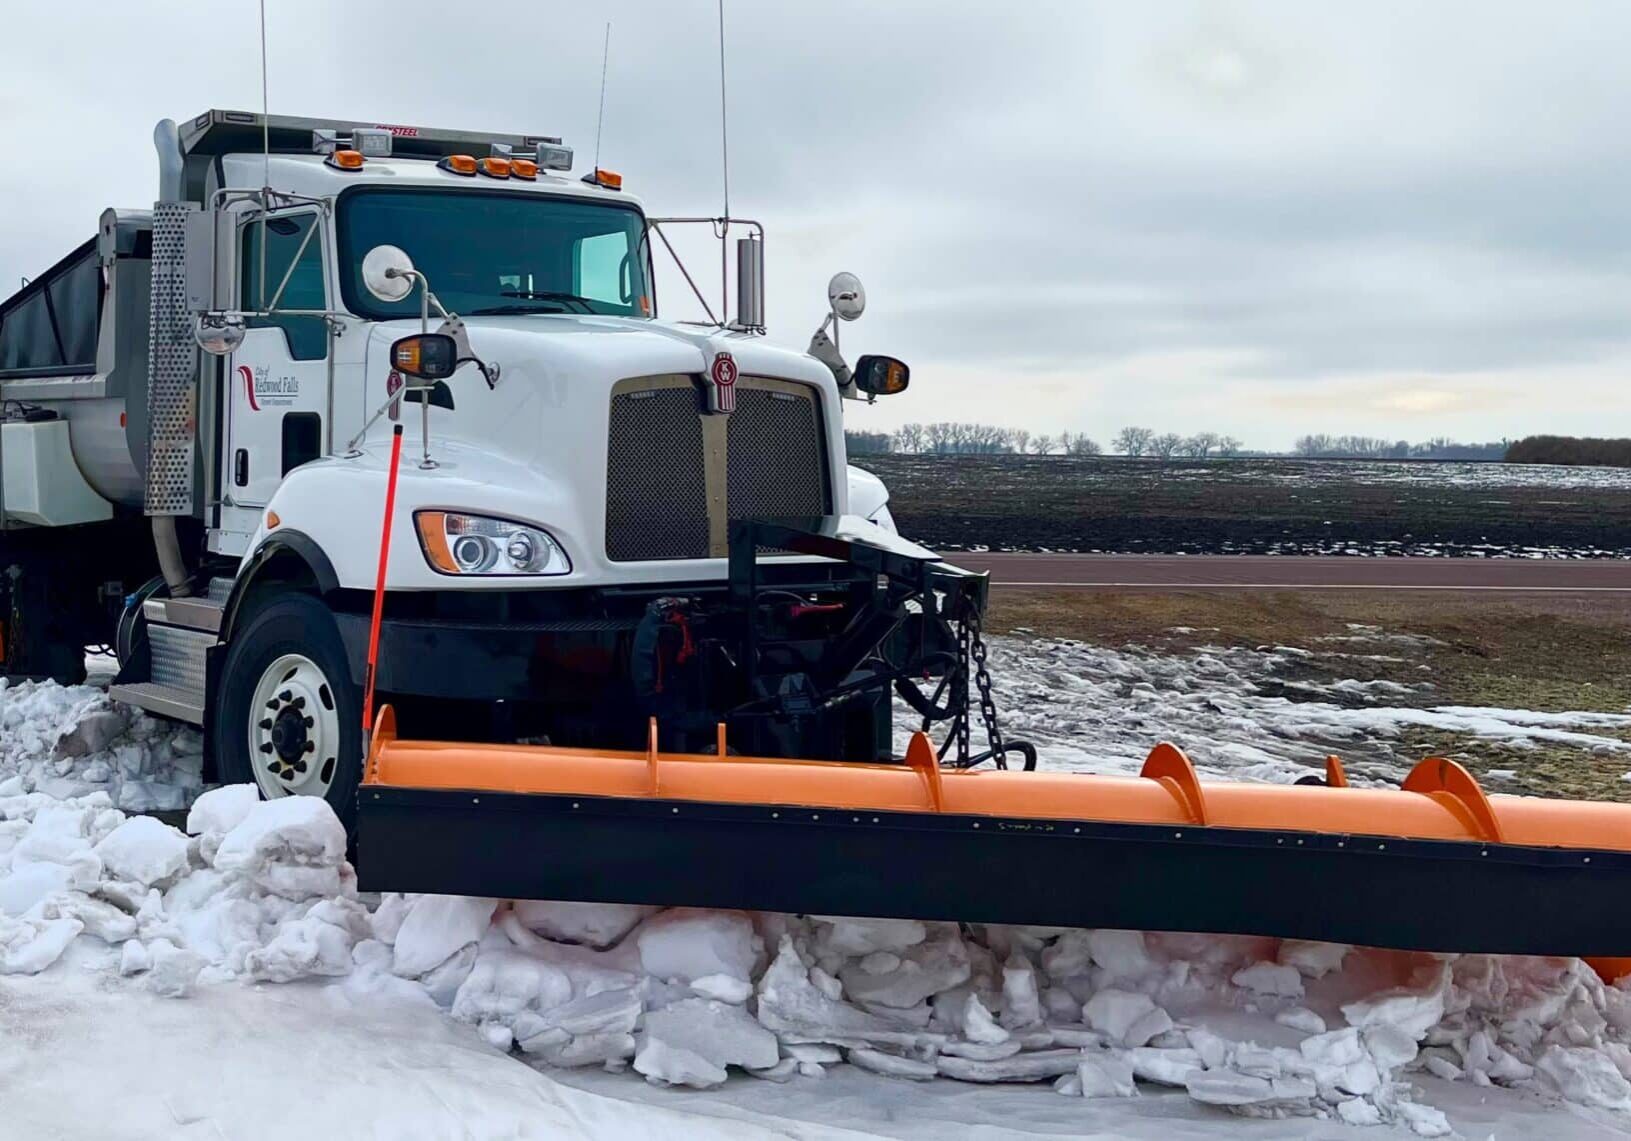 City of Redwood Falls Plow truck pushing snow on road